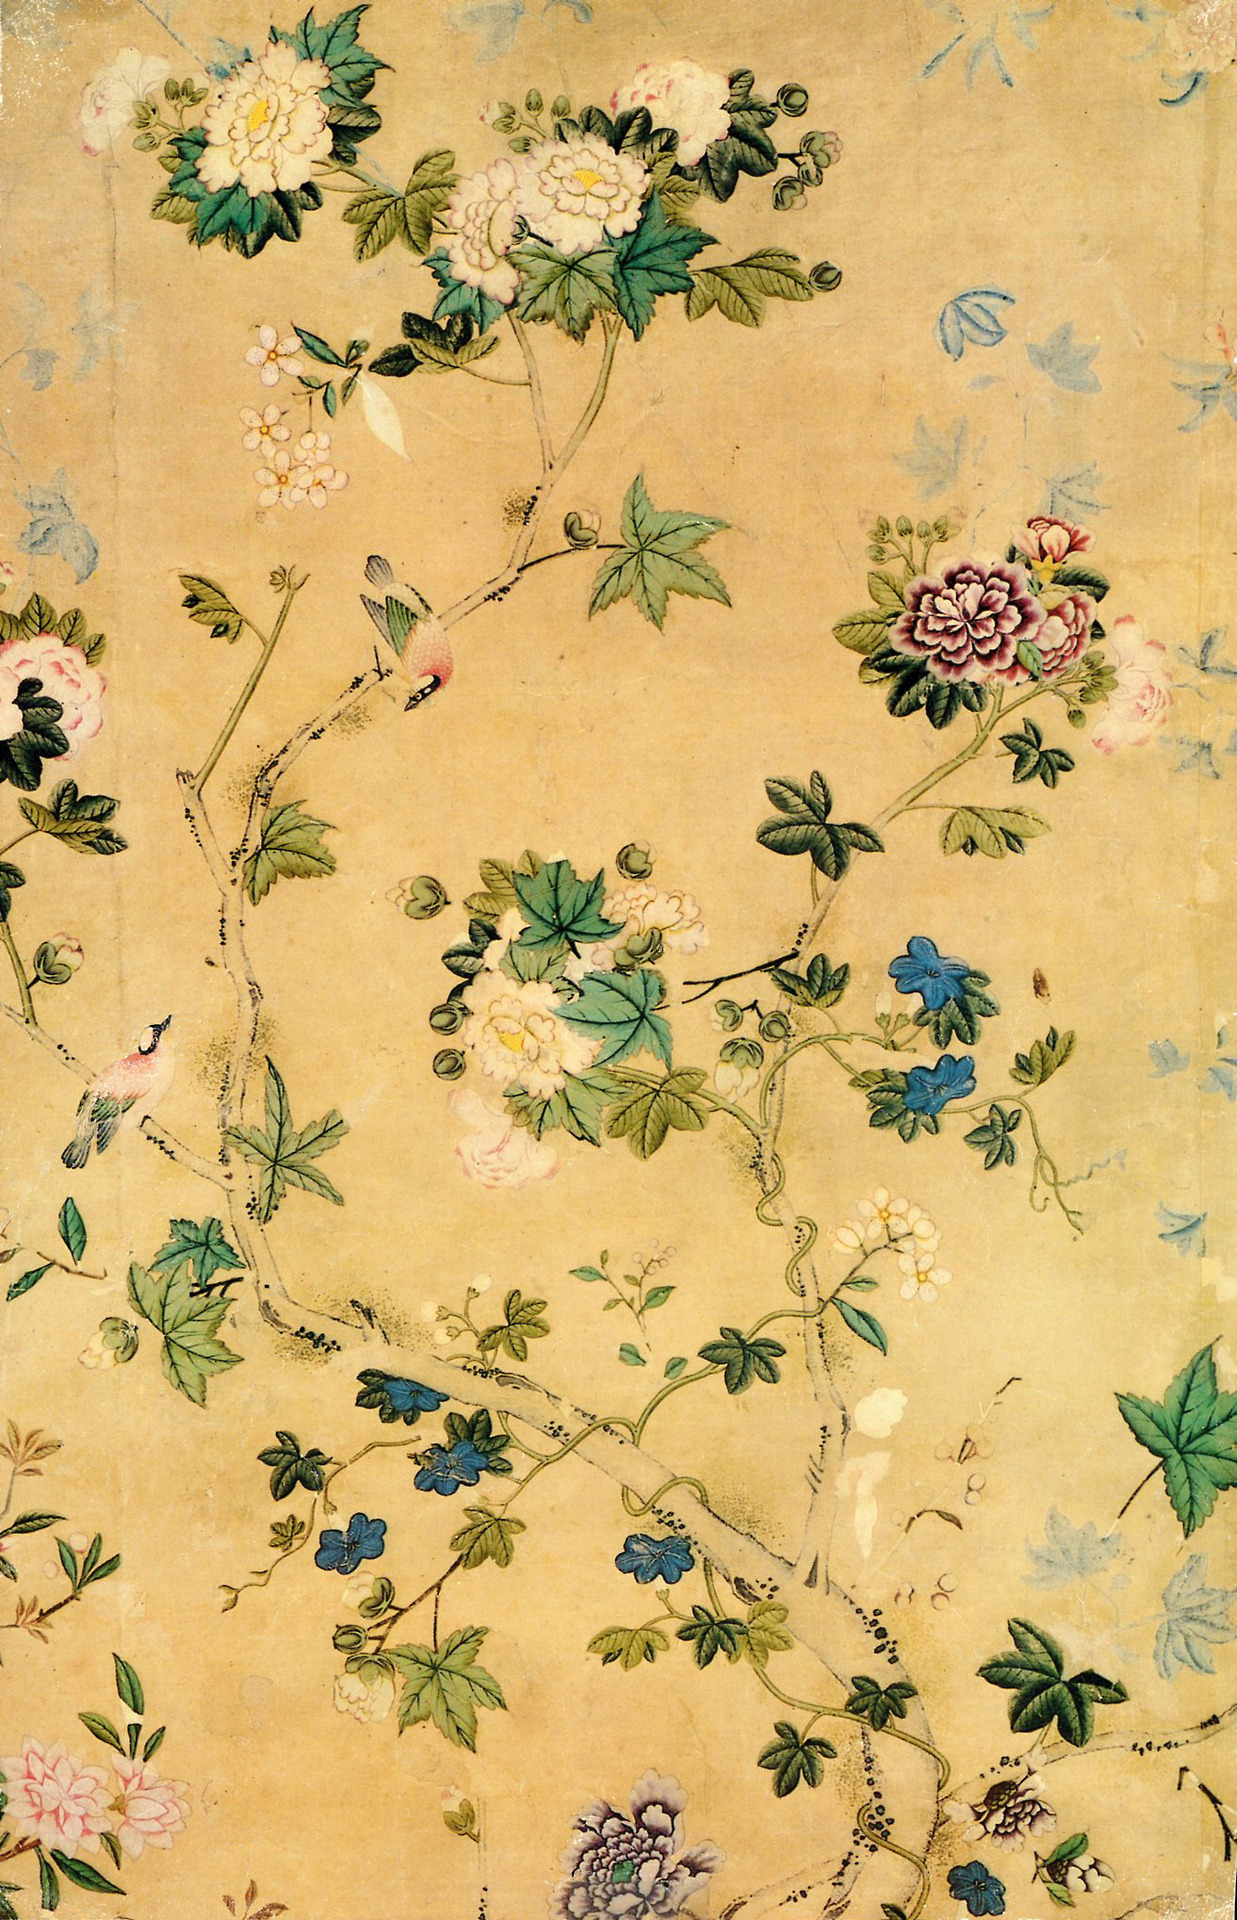 18th Century Hand Painted Chinese Wallpaper - 19th Century Wallpaper Patterns - HD Wallpaper 